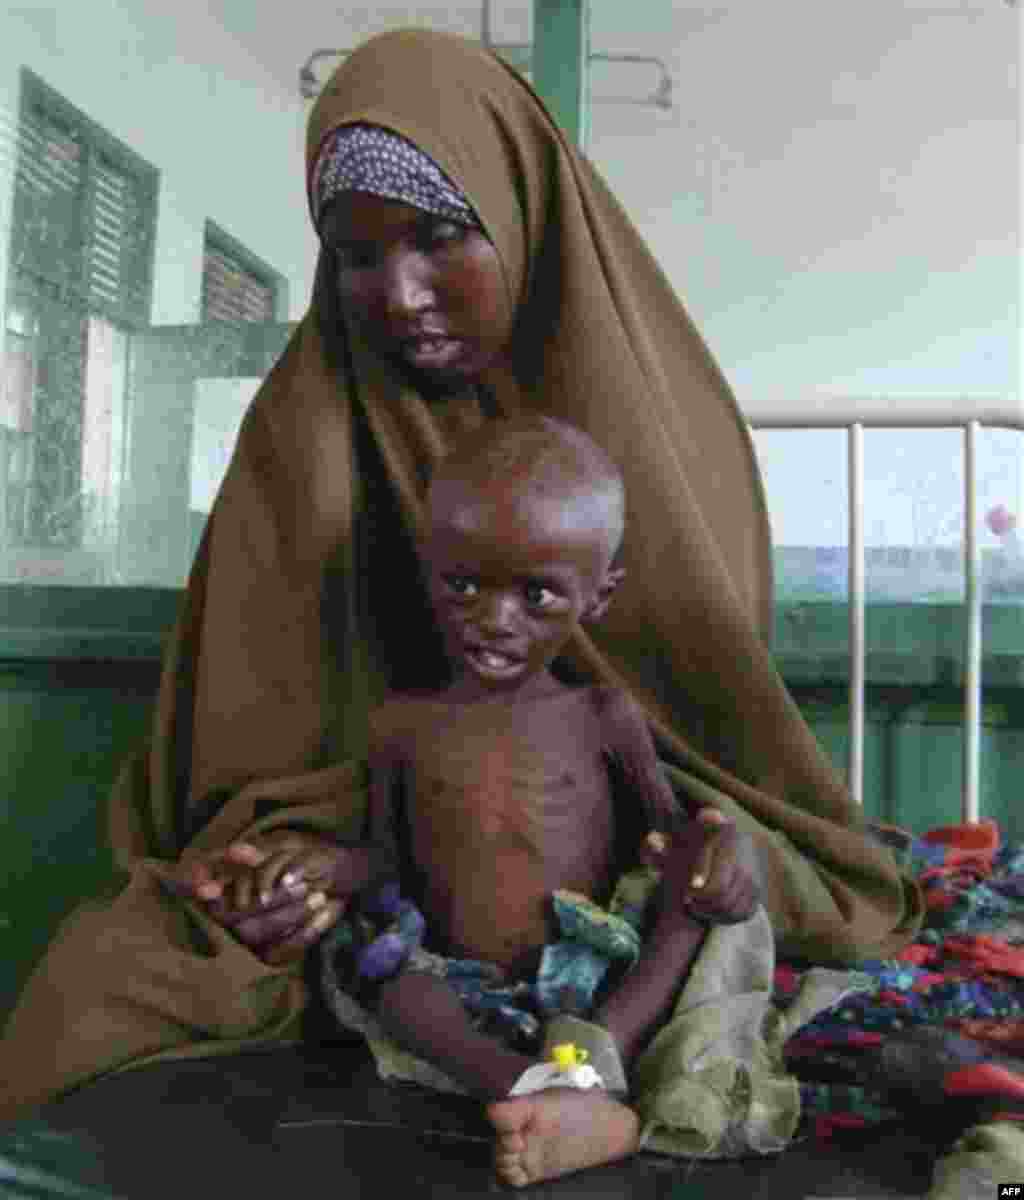 A Somali woman from southern Somalia hold her malnourished child in Banadir hospital in Mogadishu, Somalia, Thursday, July 21, 2011. Somalia's 20-year-old civil war is partly to blame for turning the drought in the Horn of Africa into a famine. Analysts w